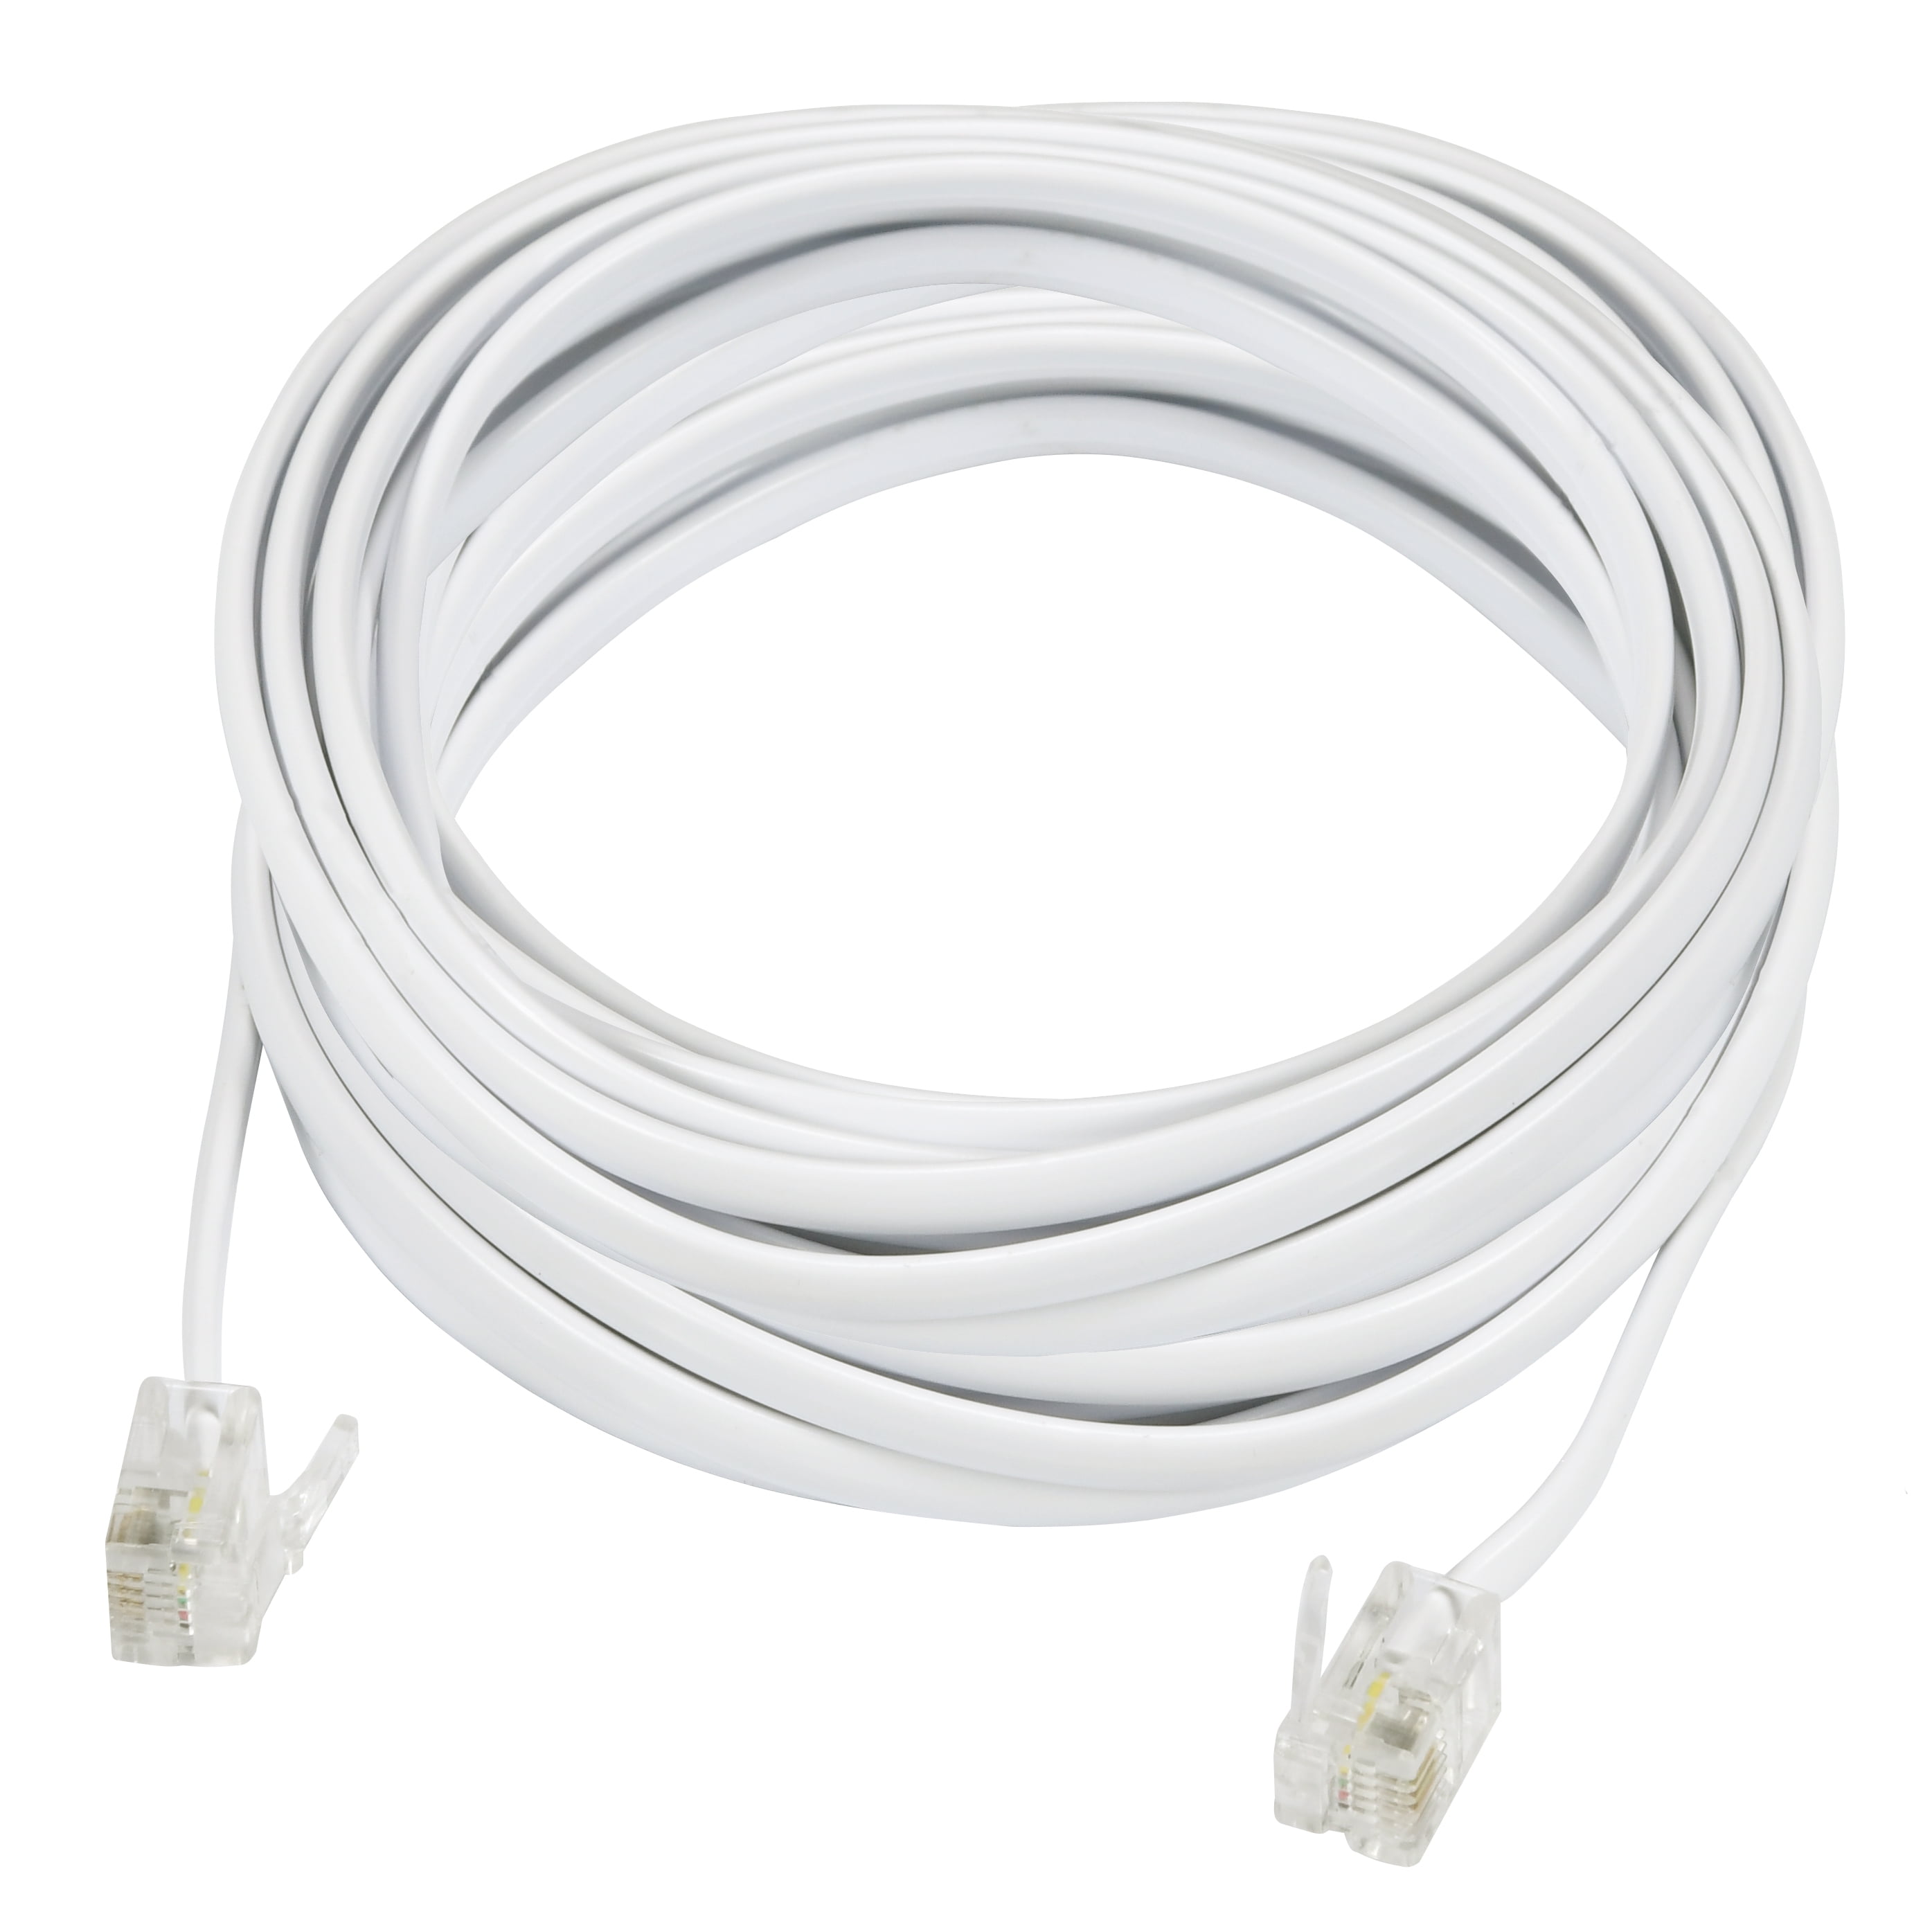 Recoton 50 ft Ivory 4 Conductors 2 Line Open Ends Phone Line Wire Cord Cable 